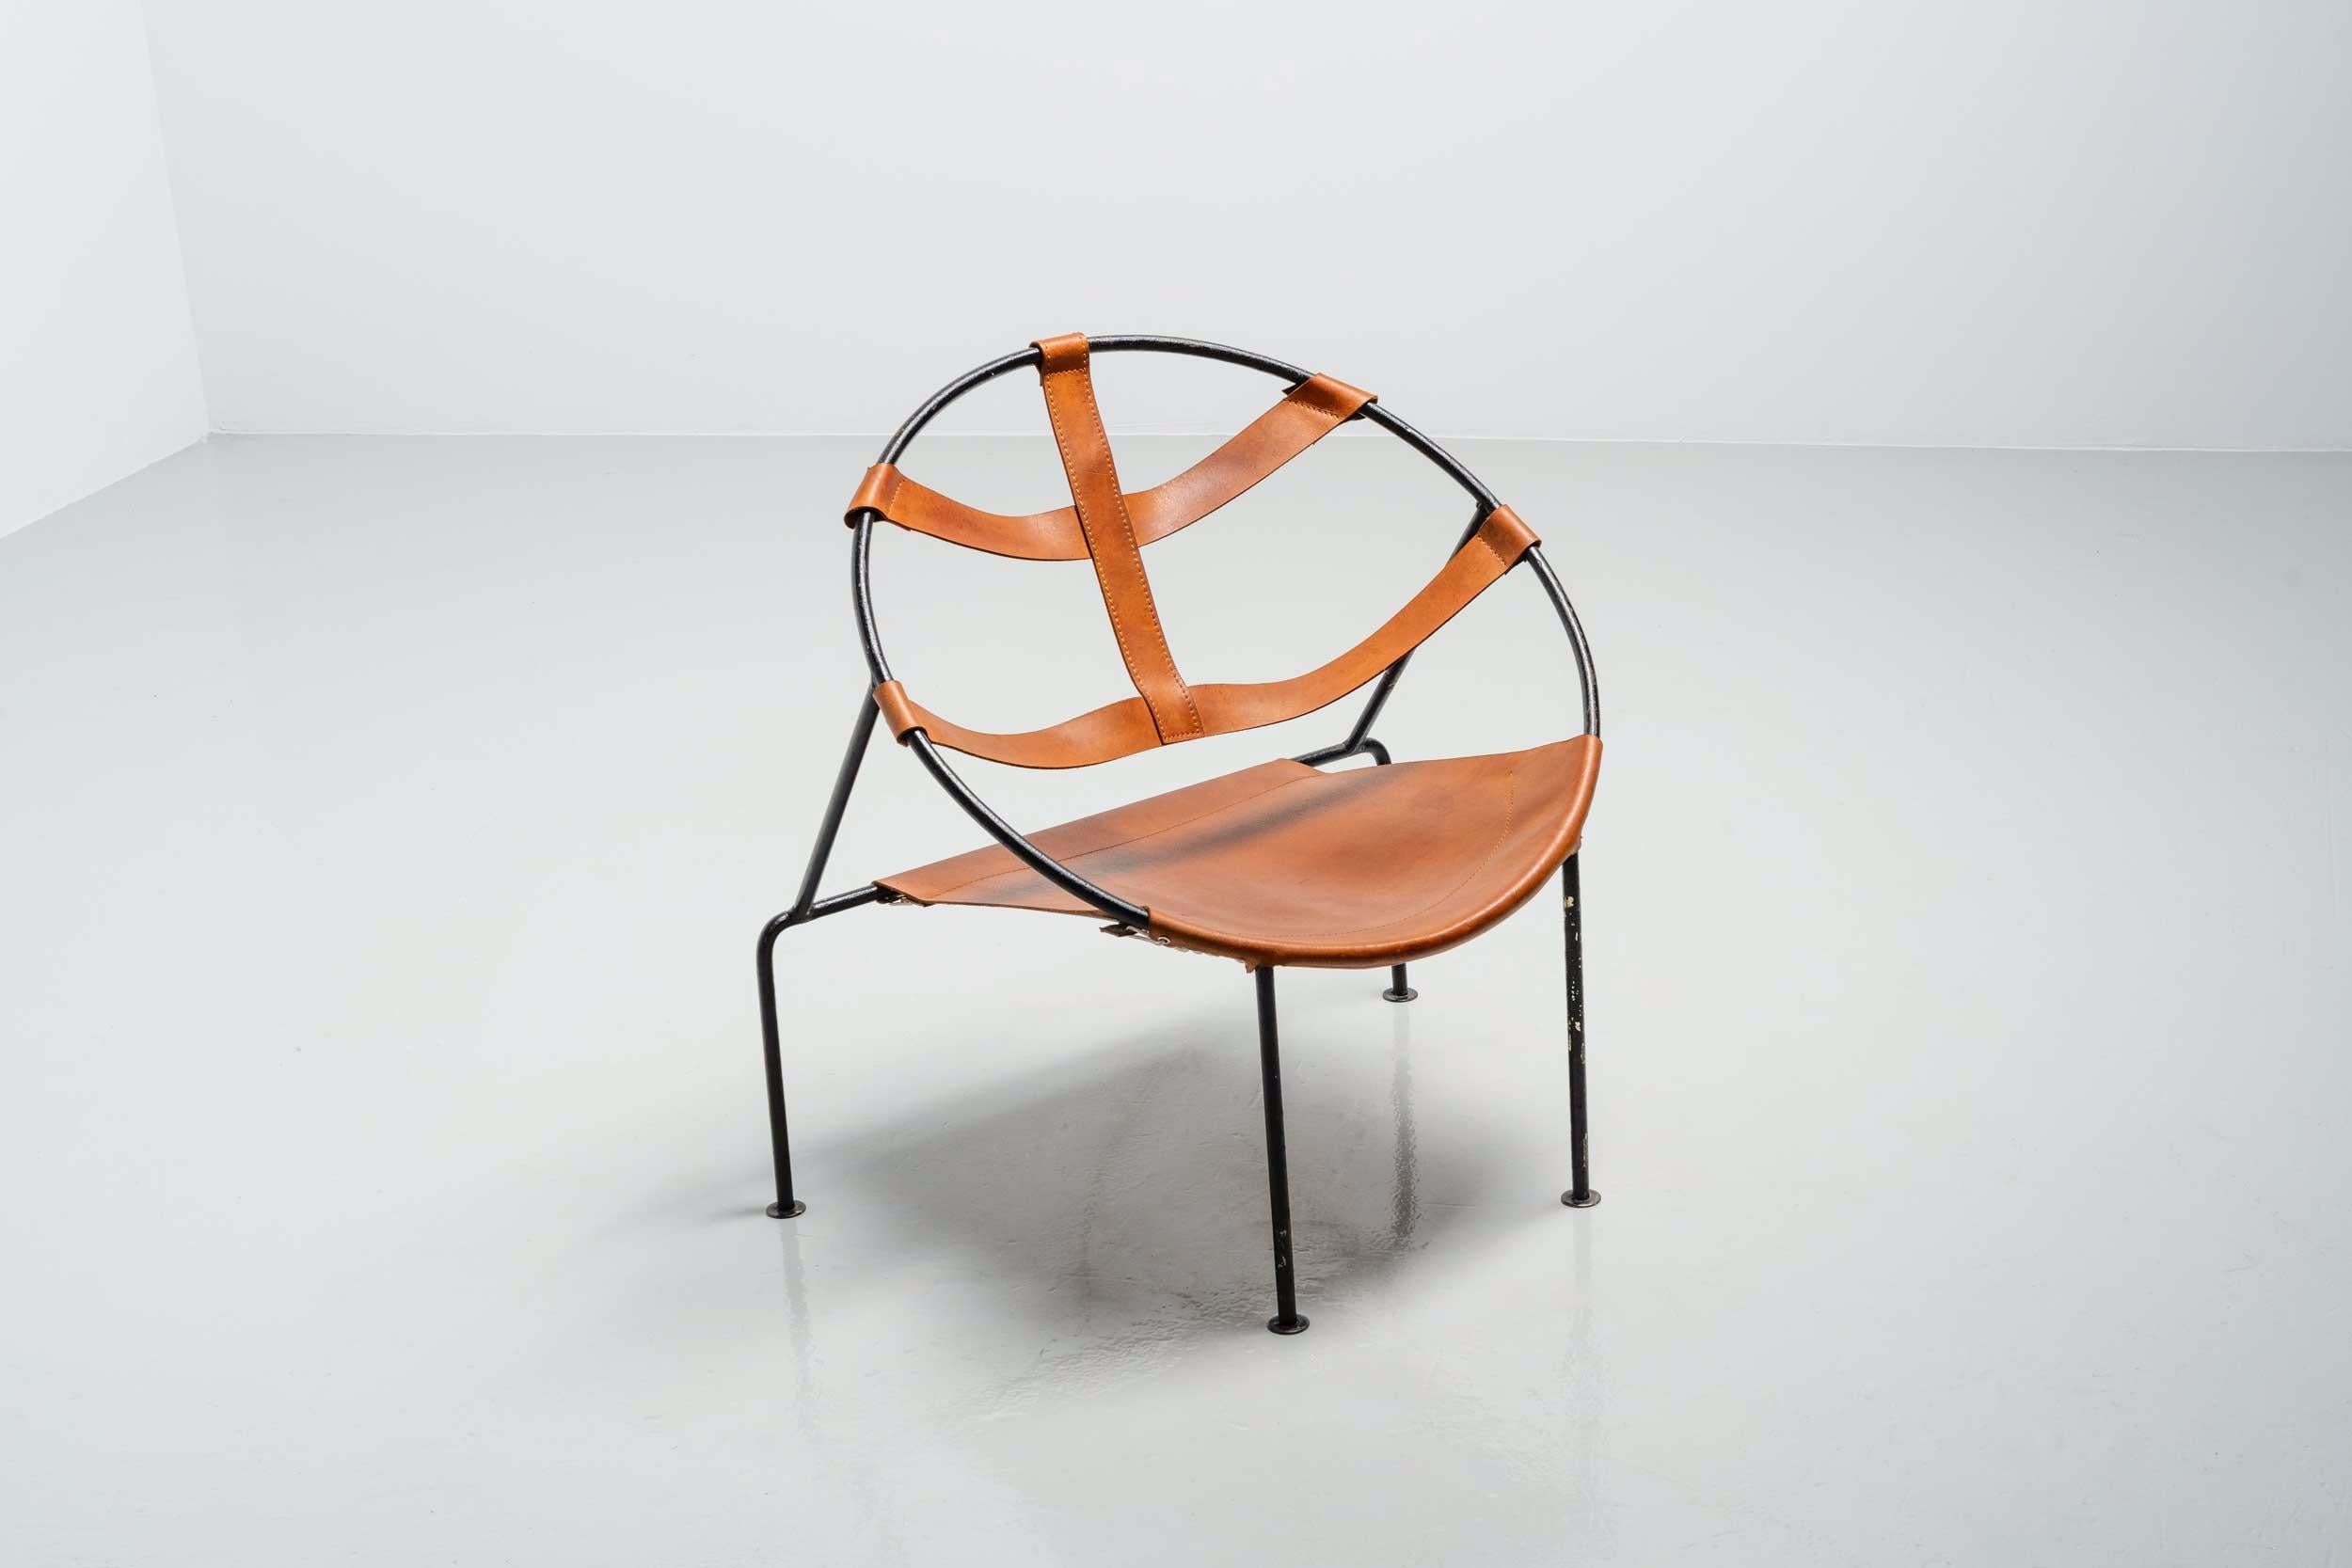 This chair model FDC-1 is designed by Flavio de Carvalho (1899-1973) and manufactured at a local atelier in Brazil, 1950. The chair has a solid steel sctructure, circle shaped and has a natural leater seat and back which has a stunning patina of